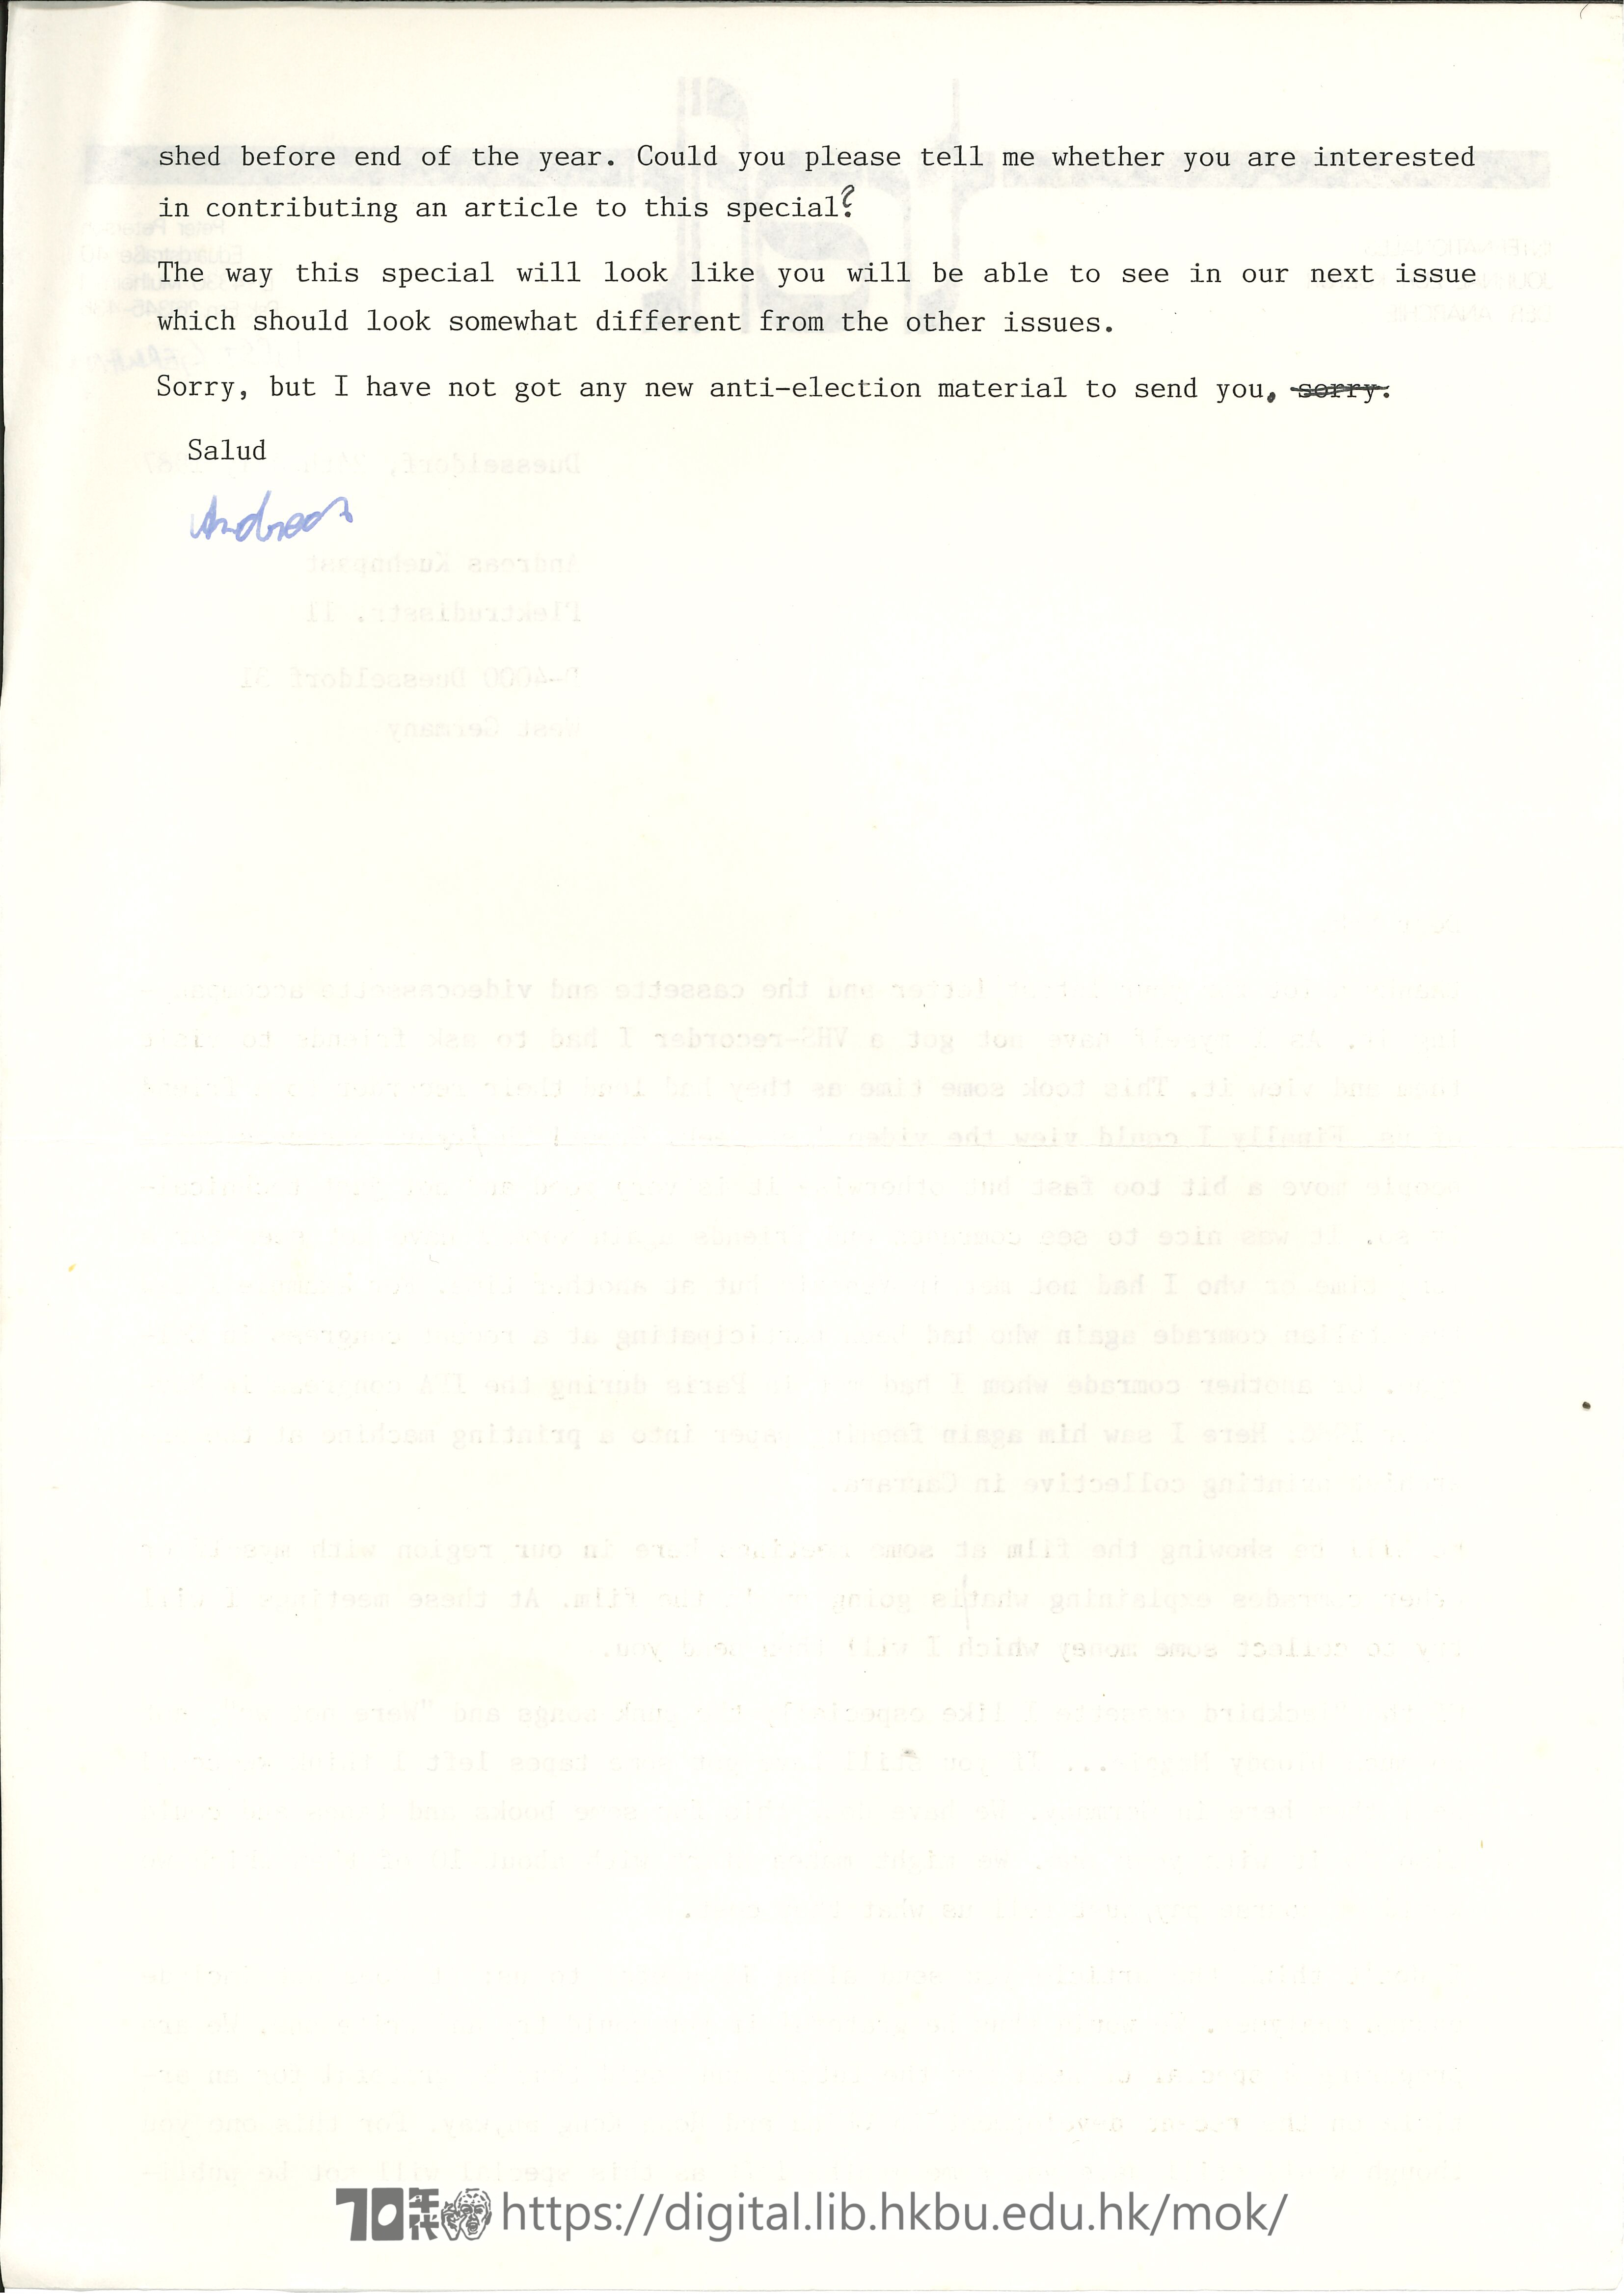   Letter from Andreas Kuehnpast to Mok Chiu Yu and Quo KUEHNPAST, Andreas 